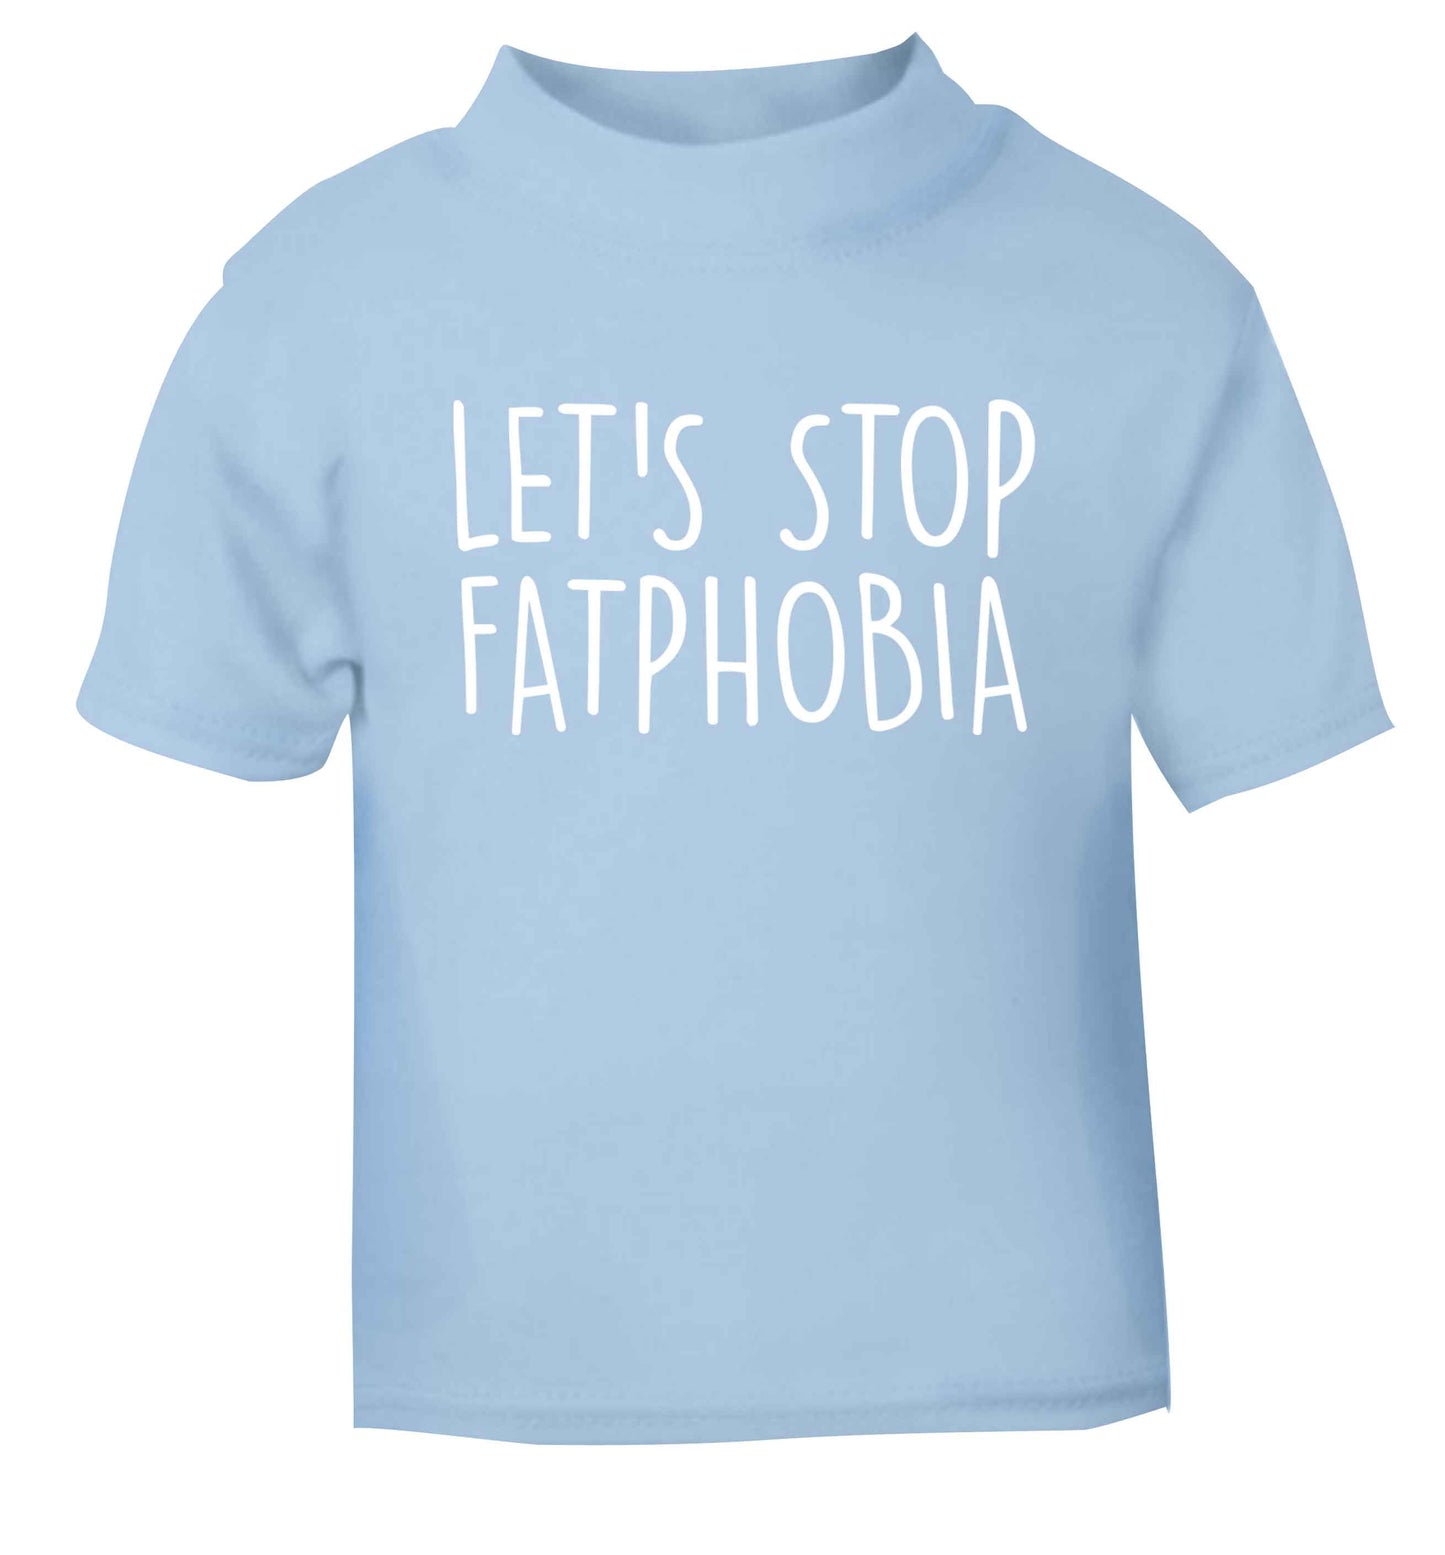 Let's stop fatphobia light blue baby toddler Tshirt 2 Years